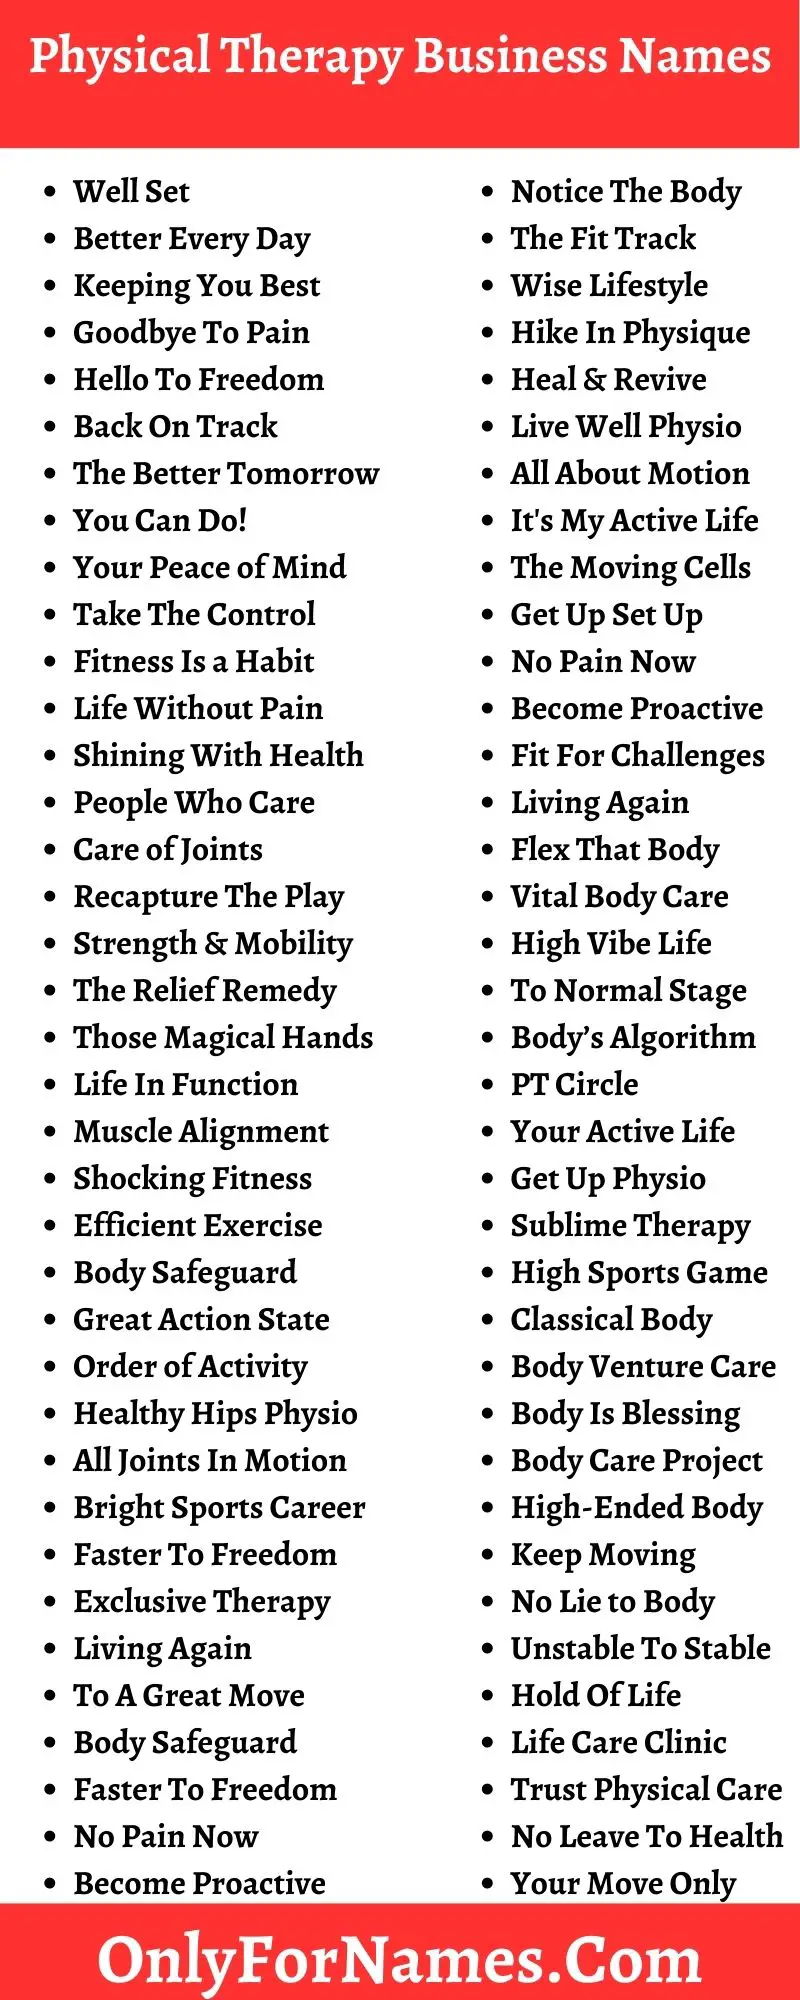 Physical Therapy Business Names